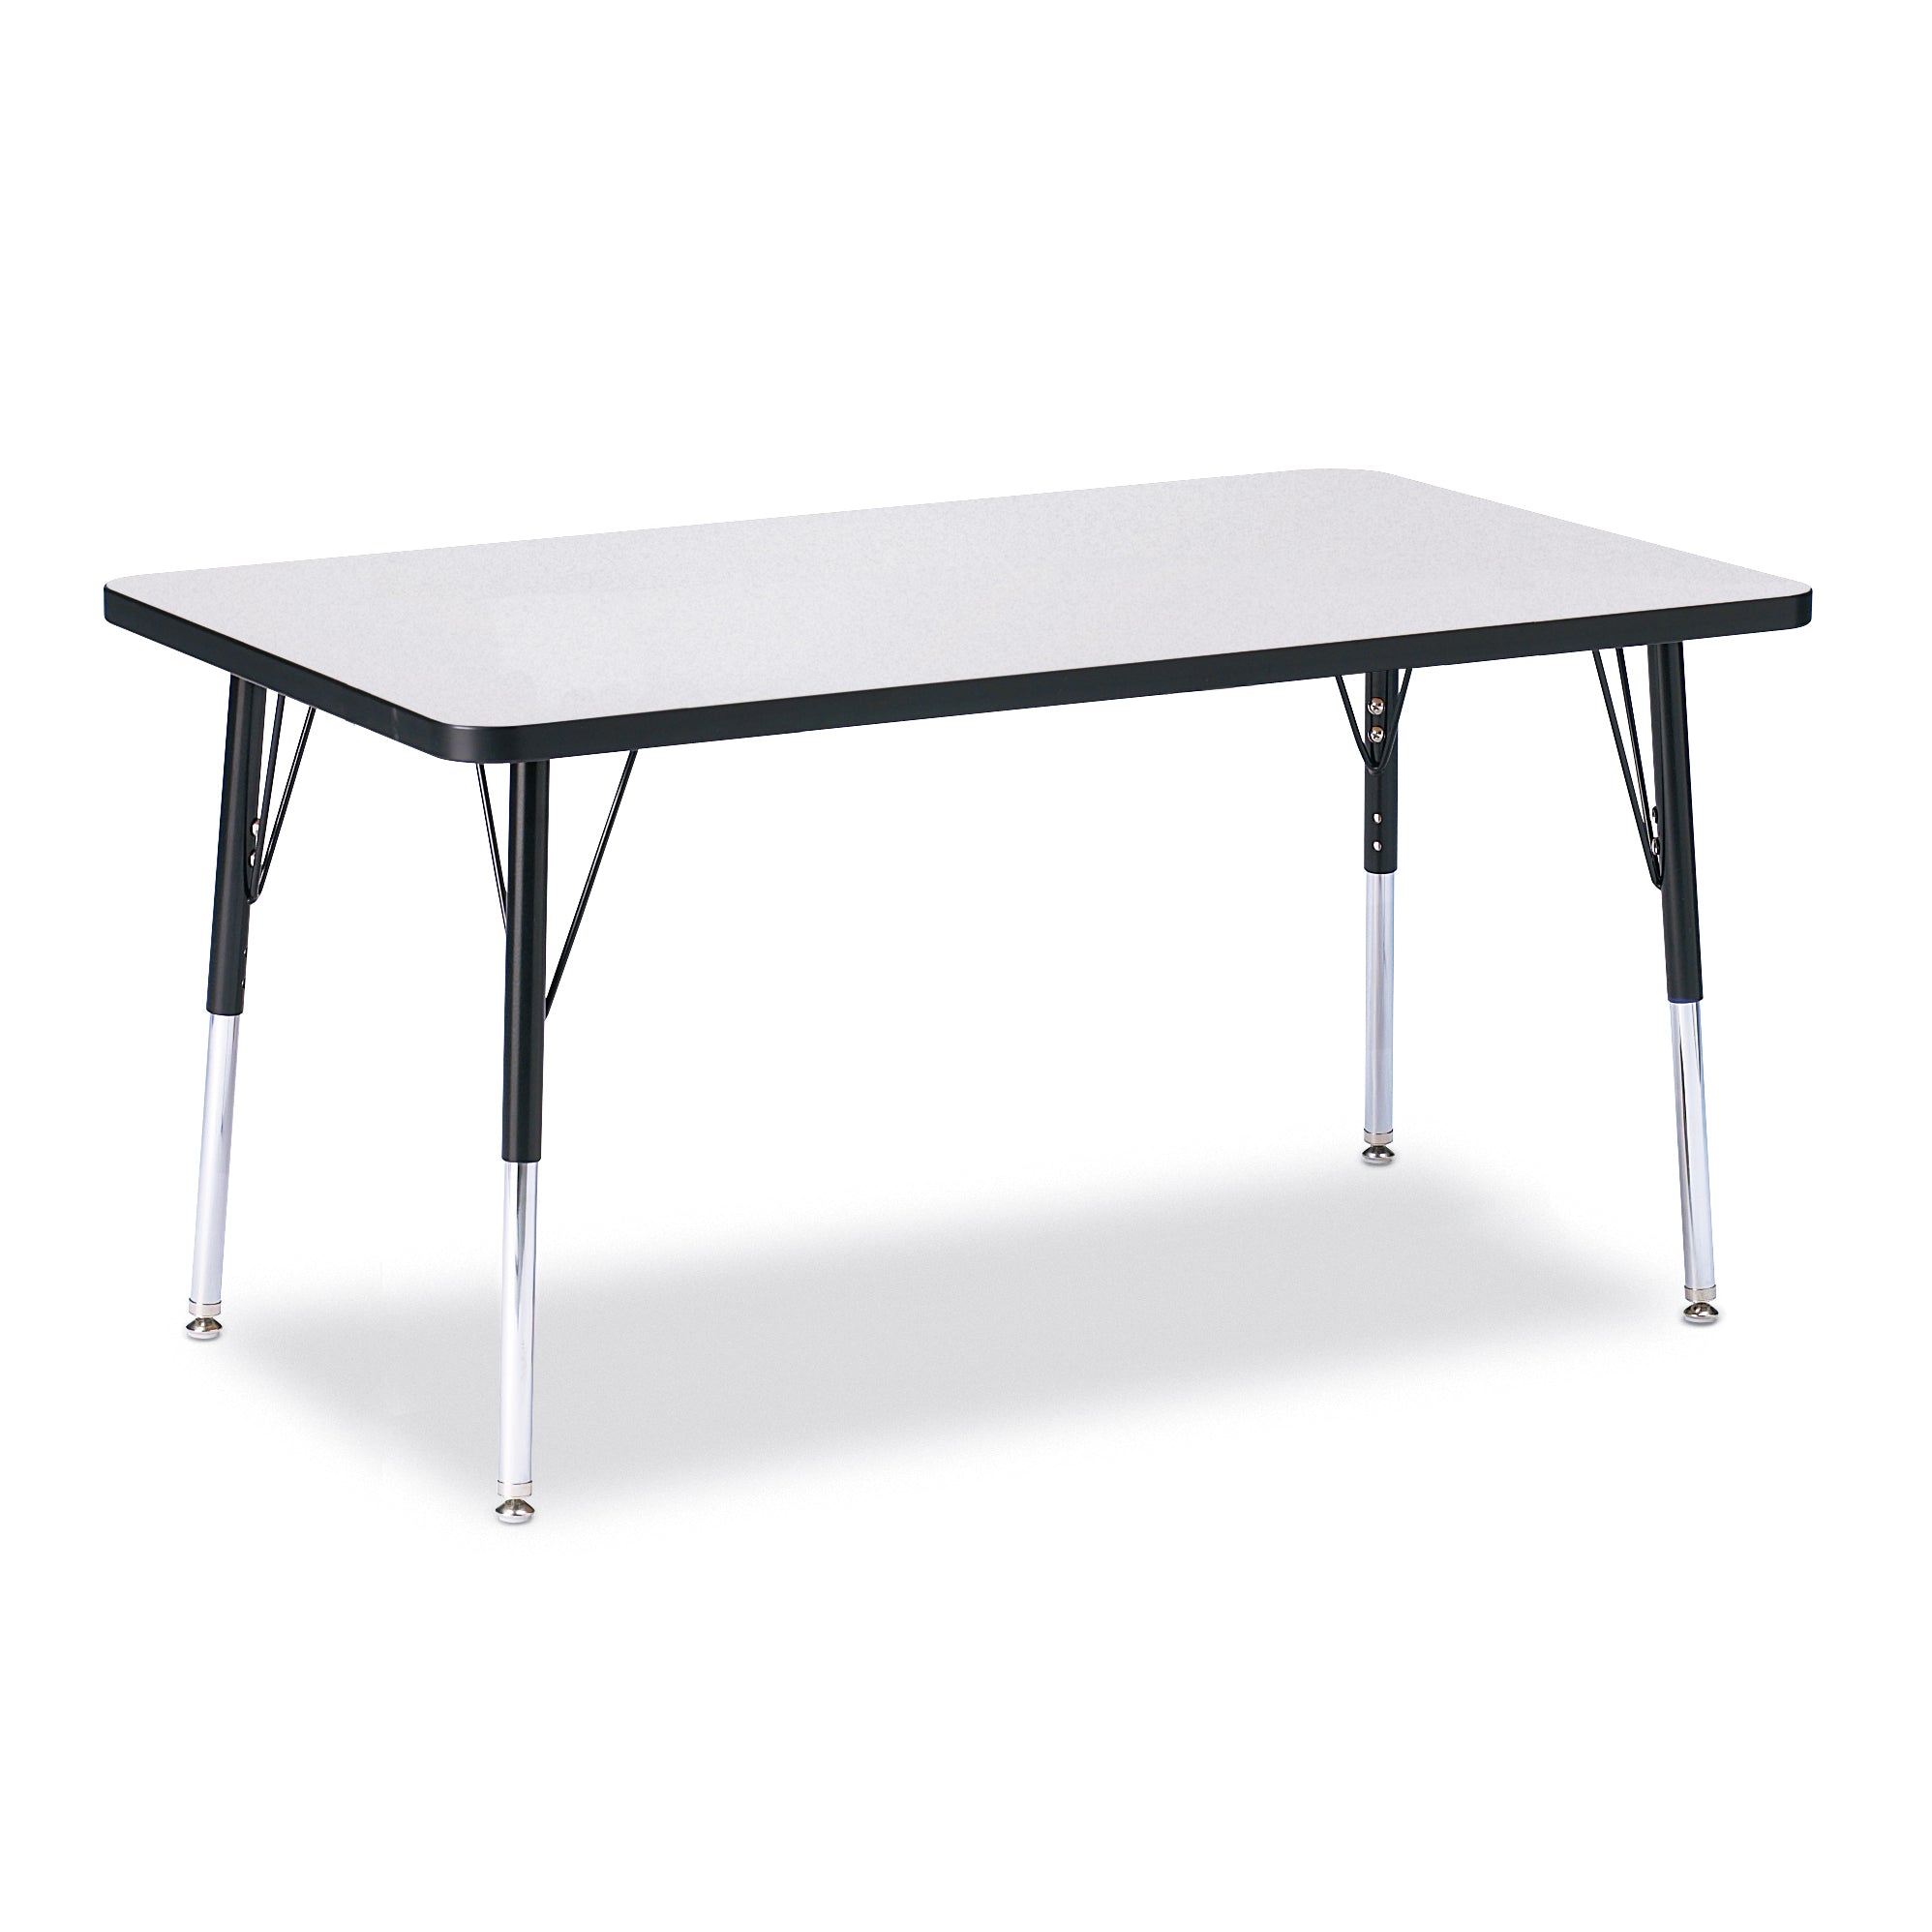 6473JCA180, Berries Rectangle Activity Table - 30" X 48", A-height - Freckled Gray/Black/Black